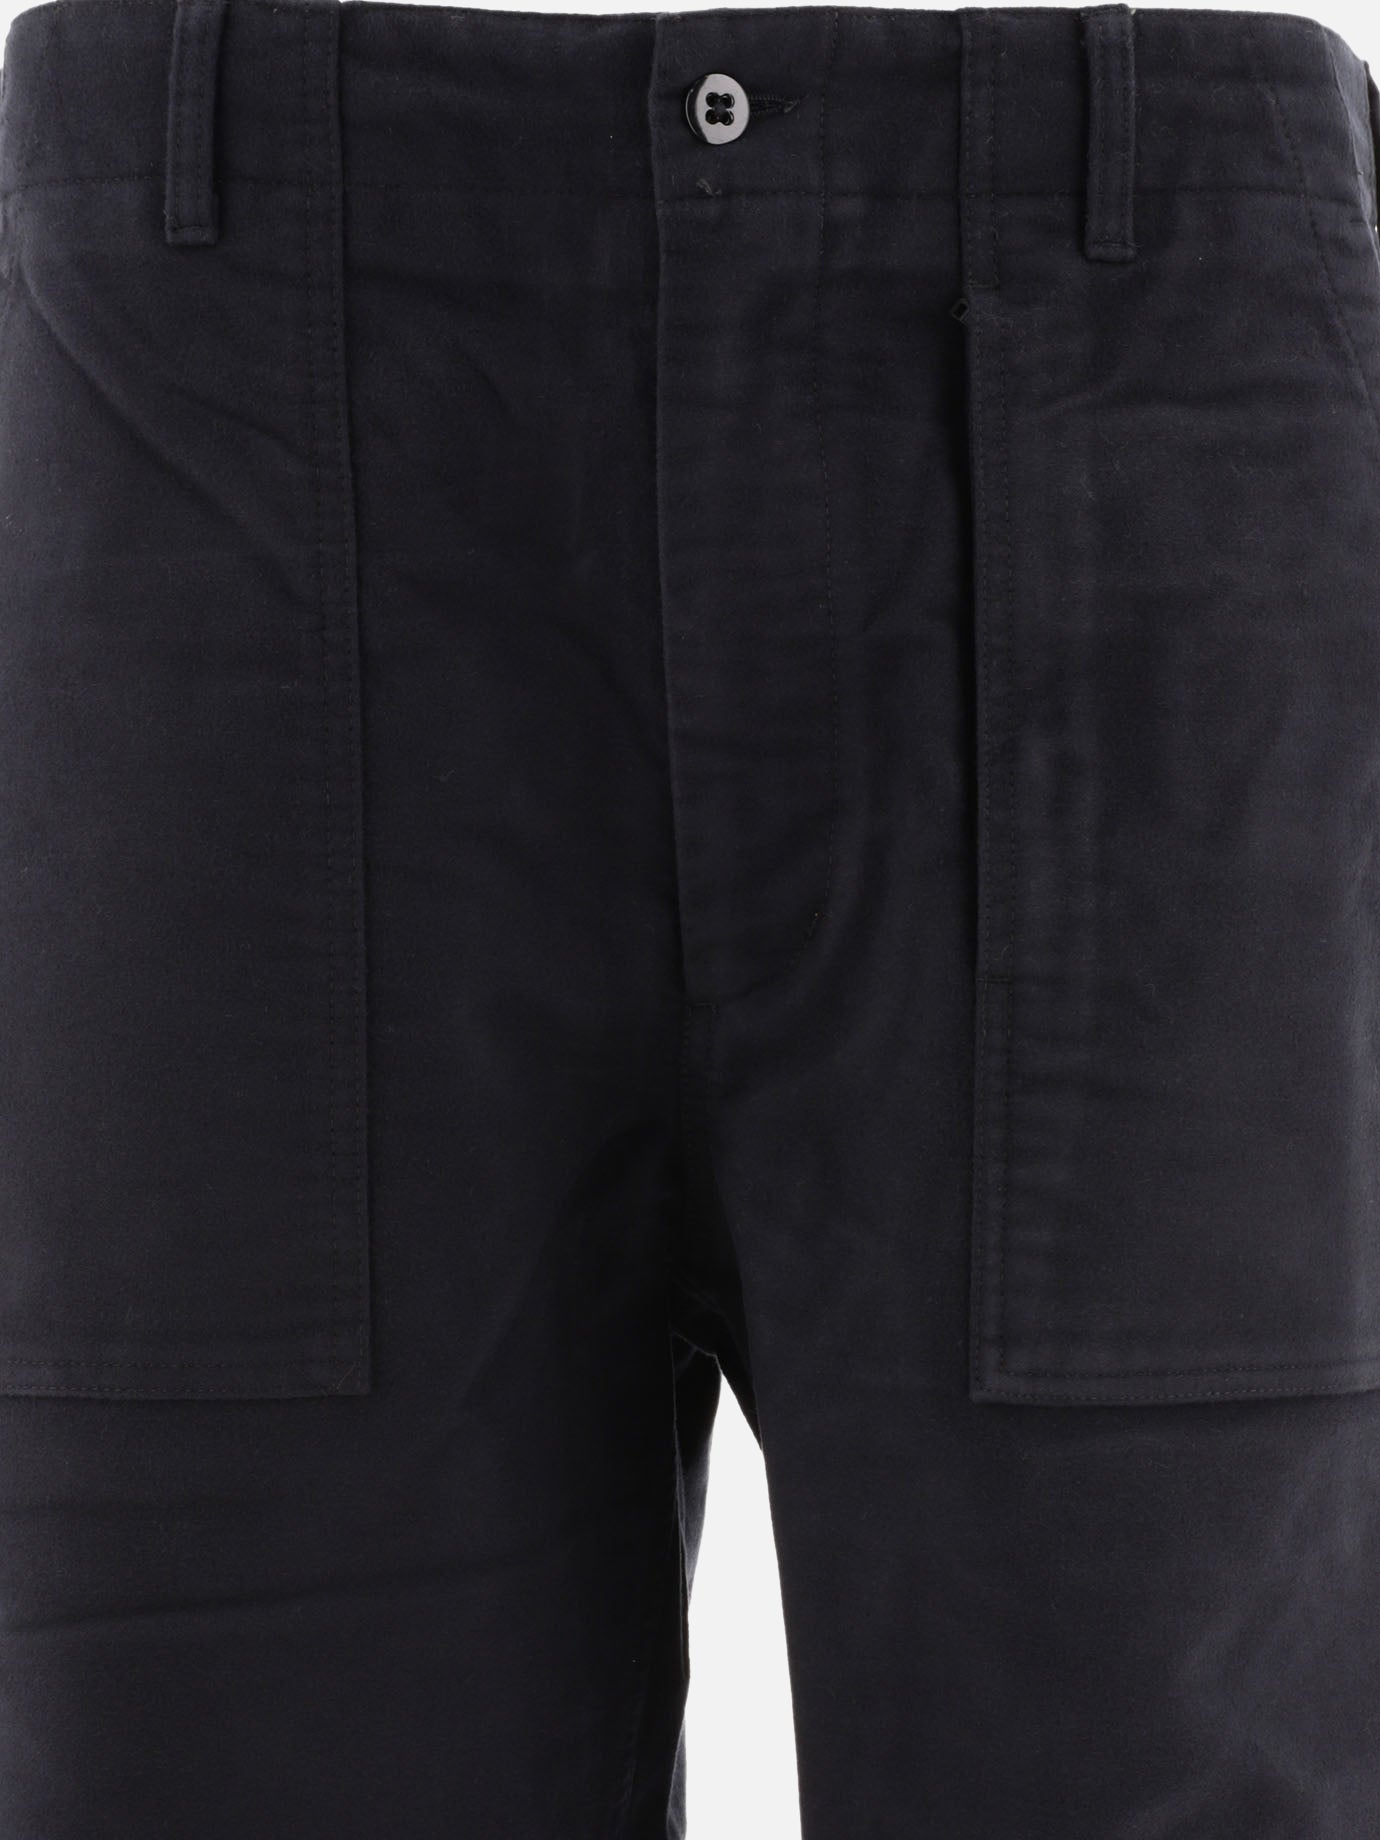 "Fatigue" trousers